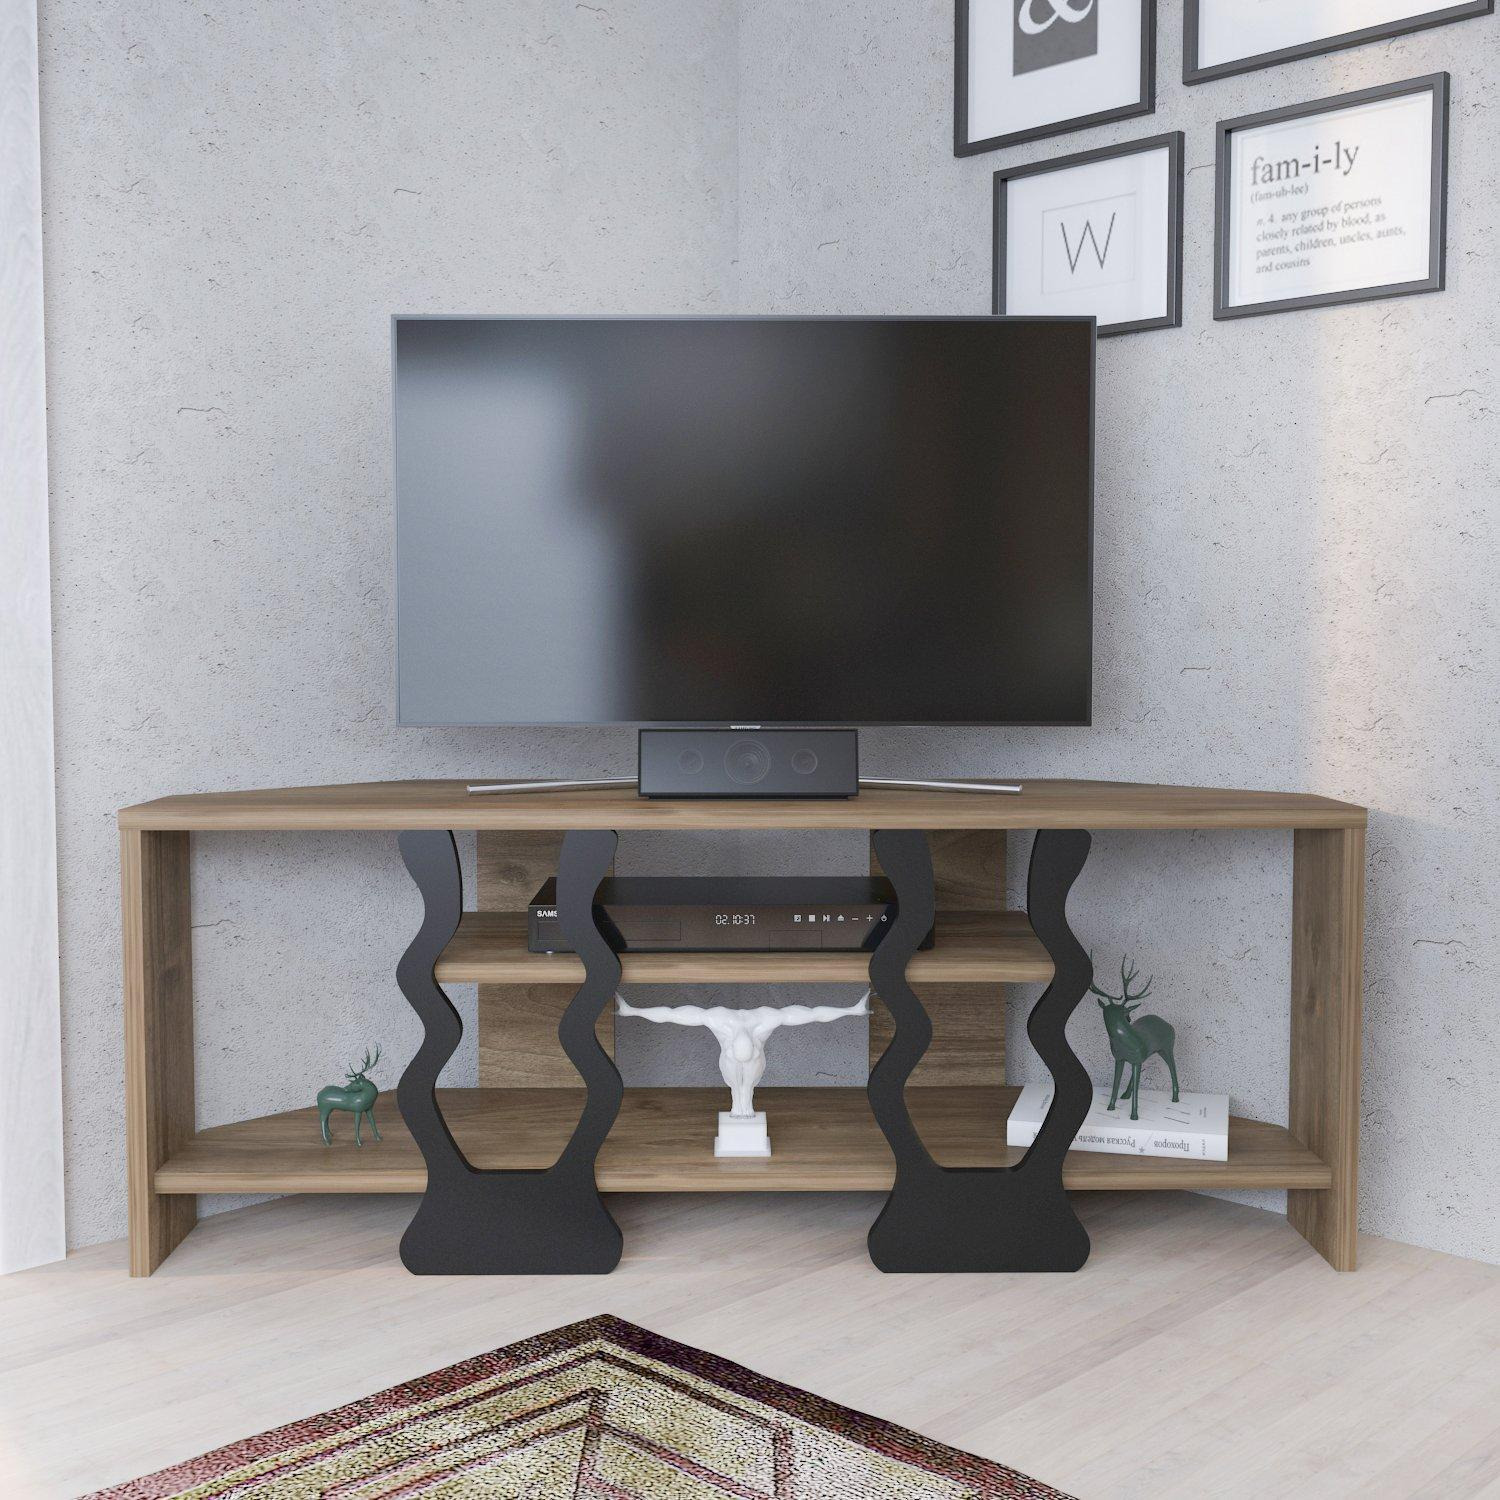 Firal Corner TV Stand TV Unit for TVs up to 45 inch - image 1